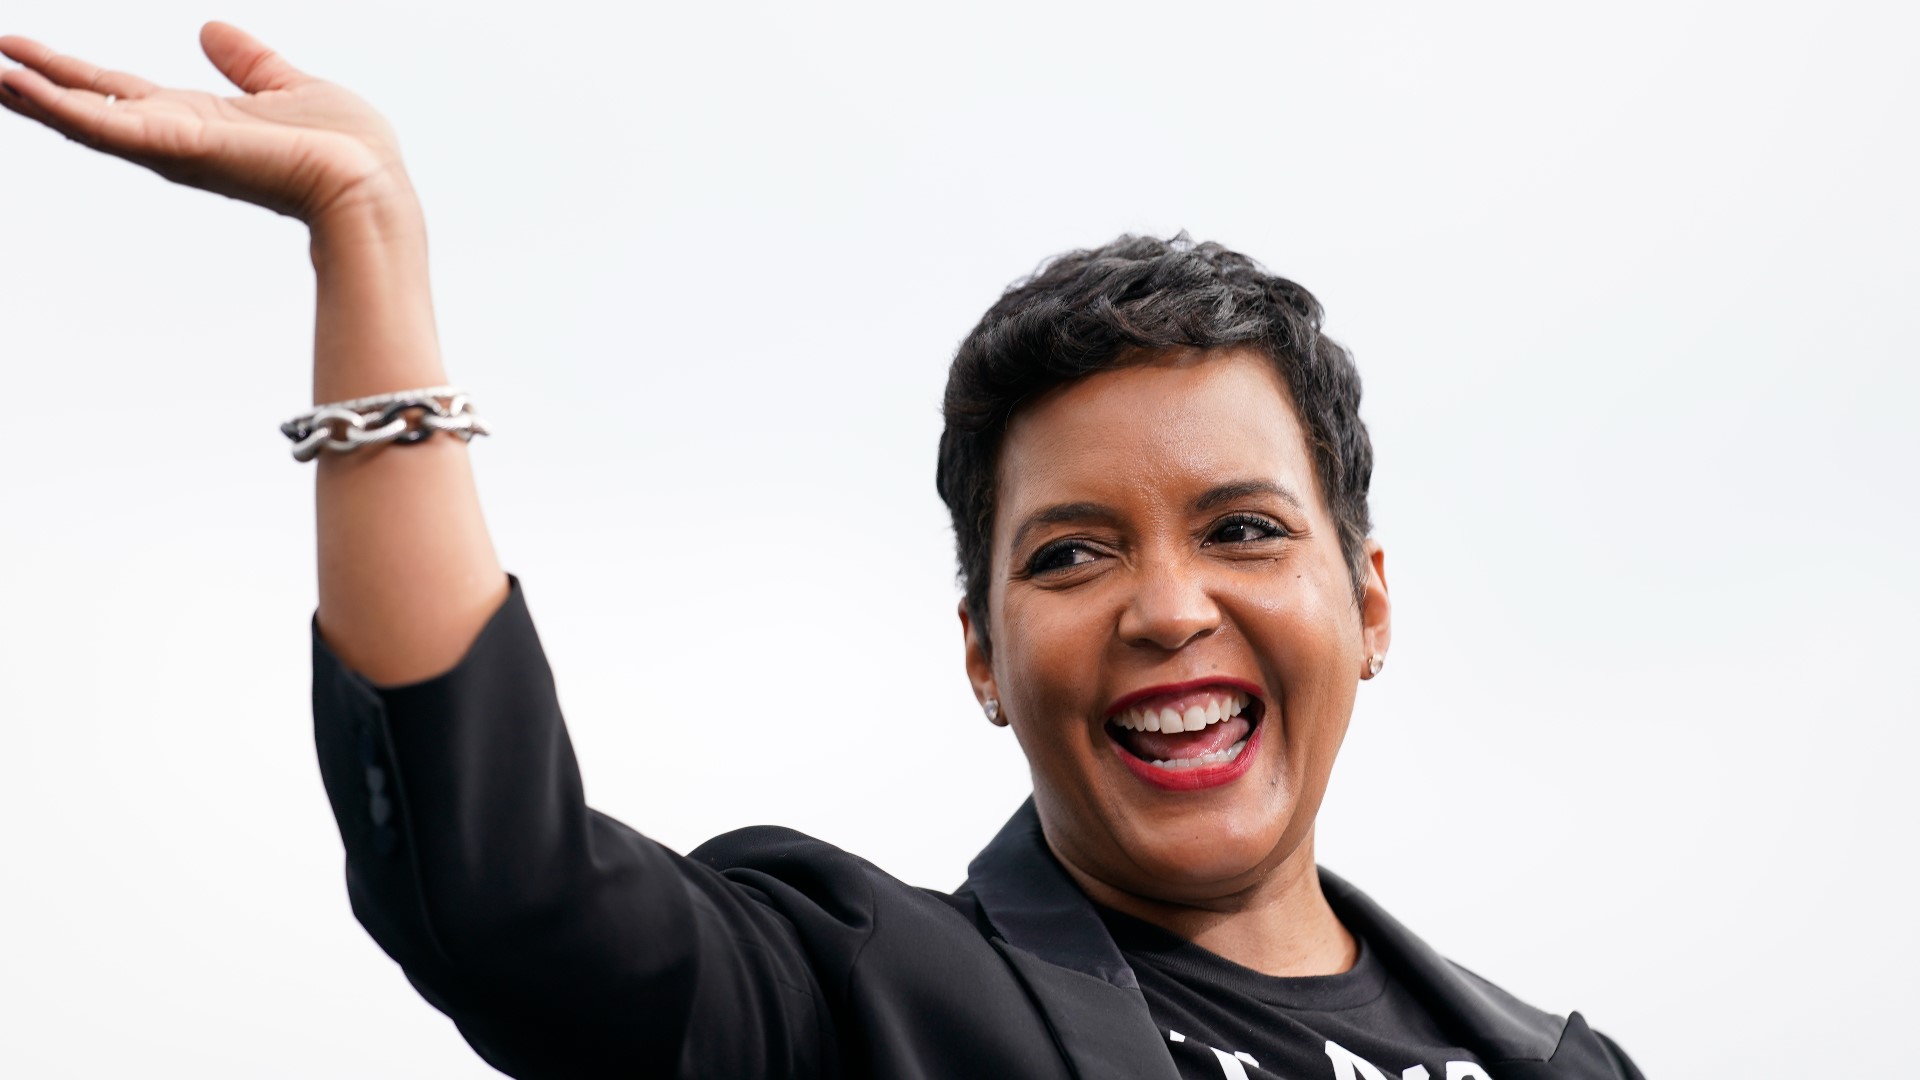 Keisha Lance Bottoms took to social media to spread the news Monday morning, calling it a "dream" of hers.